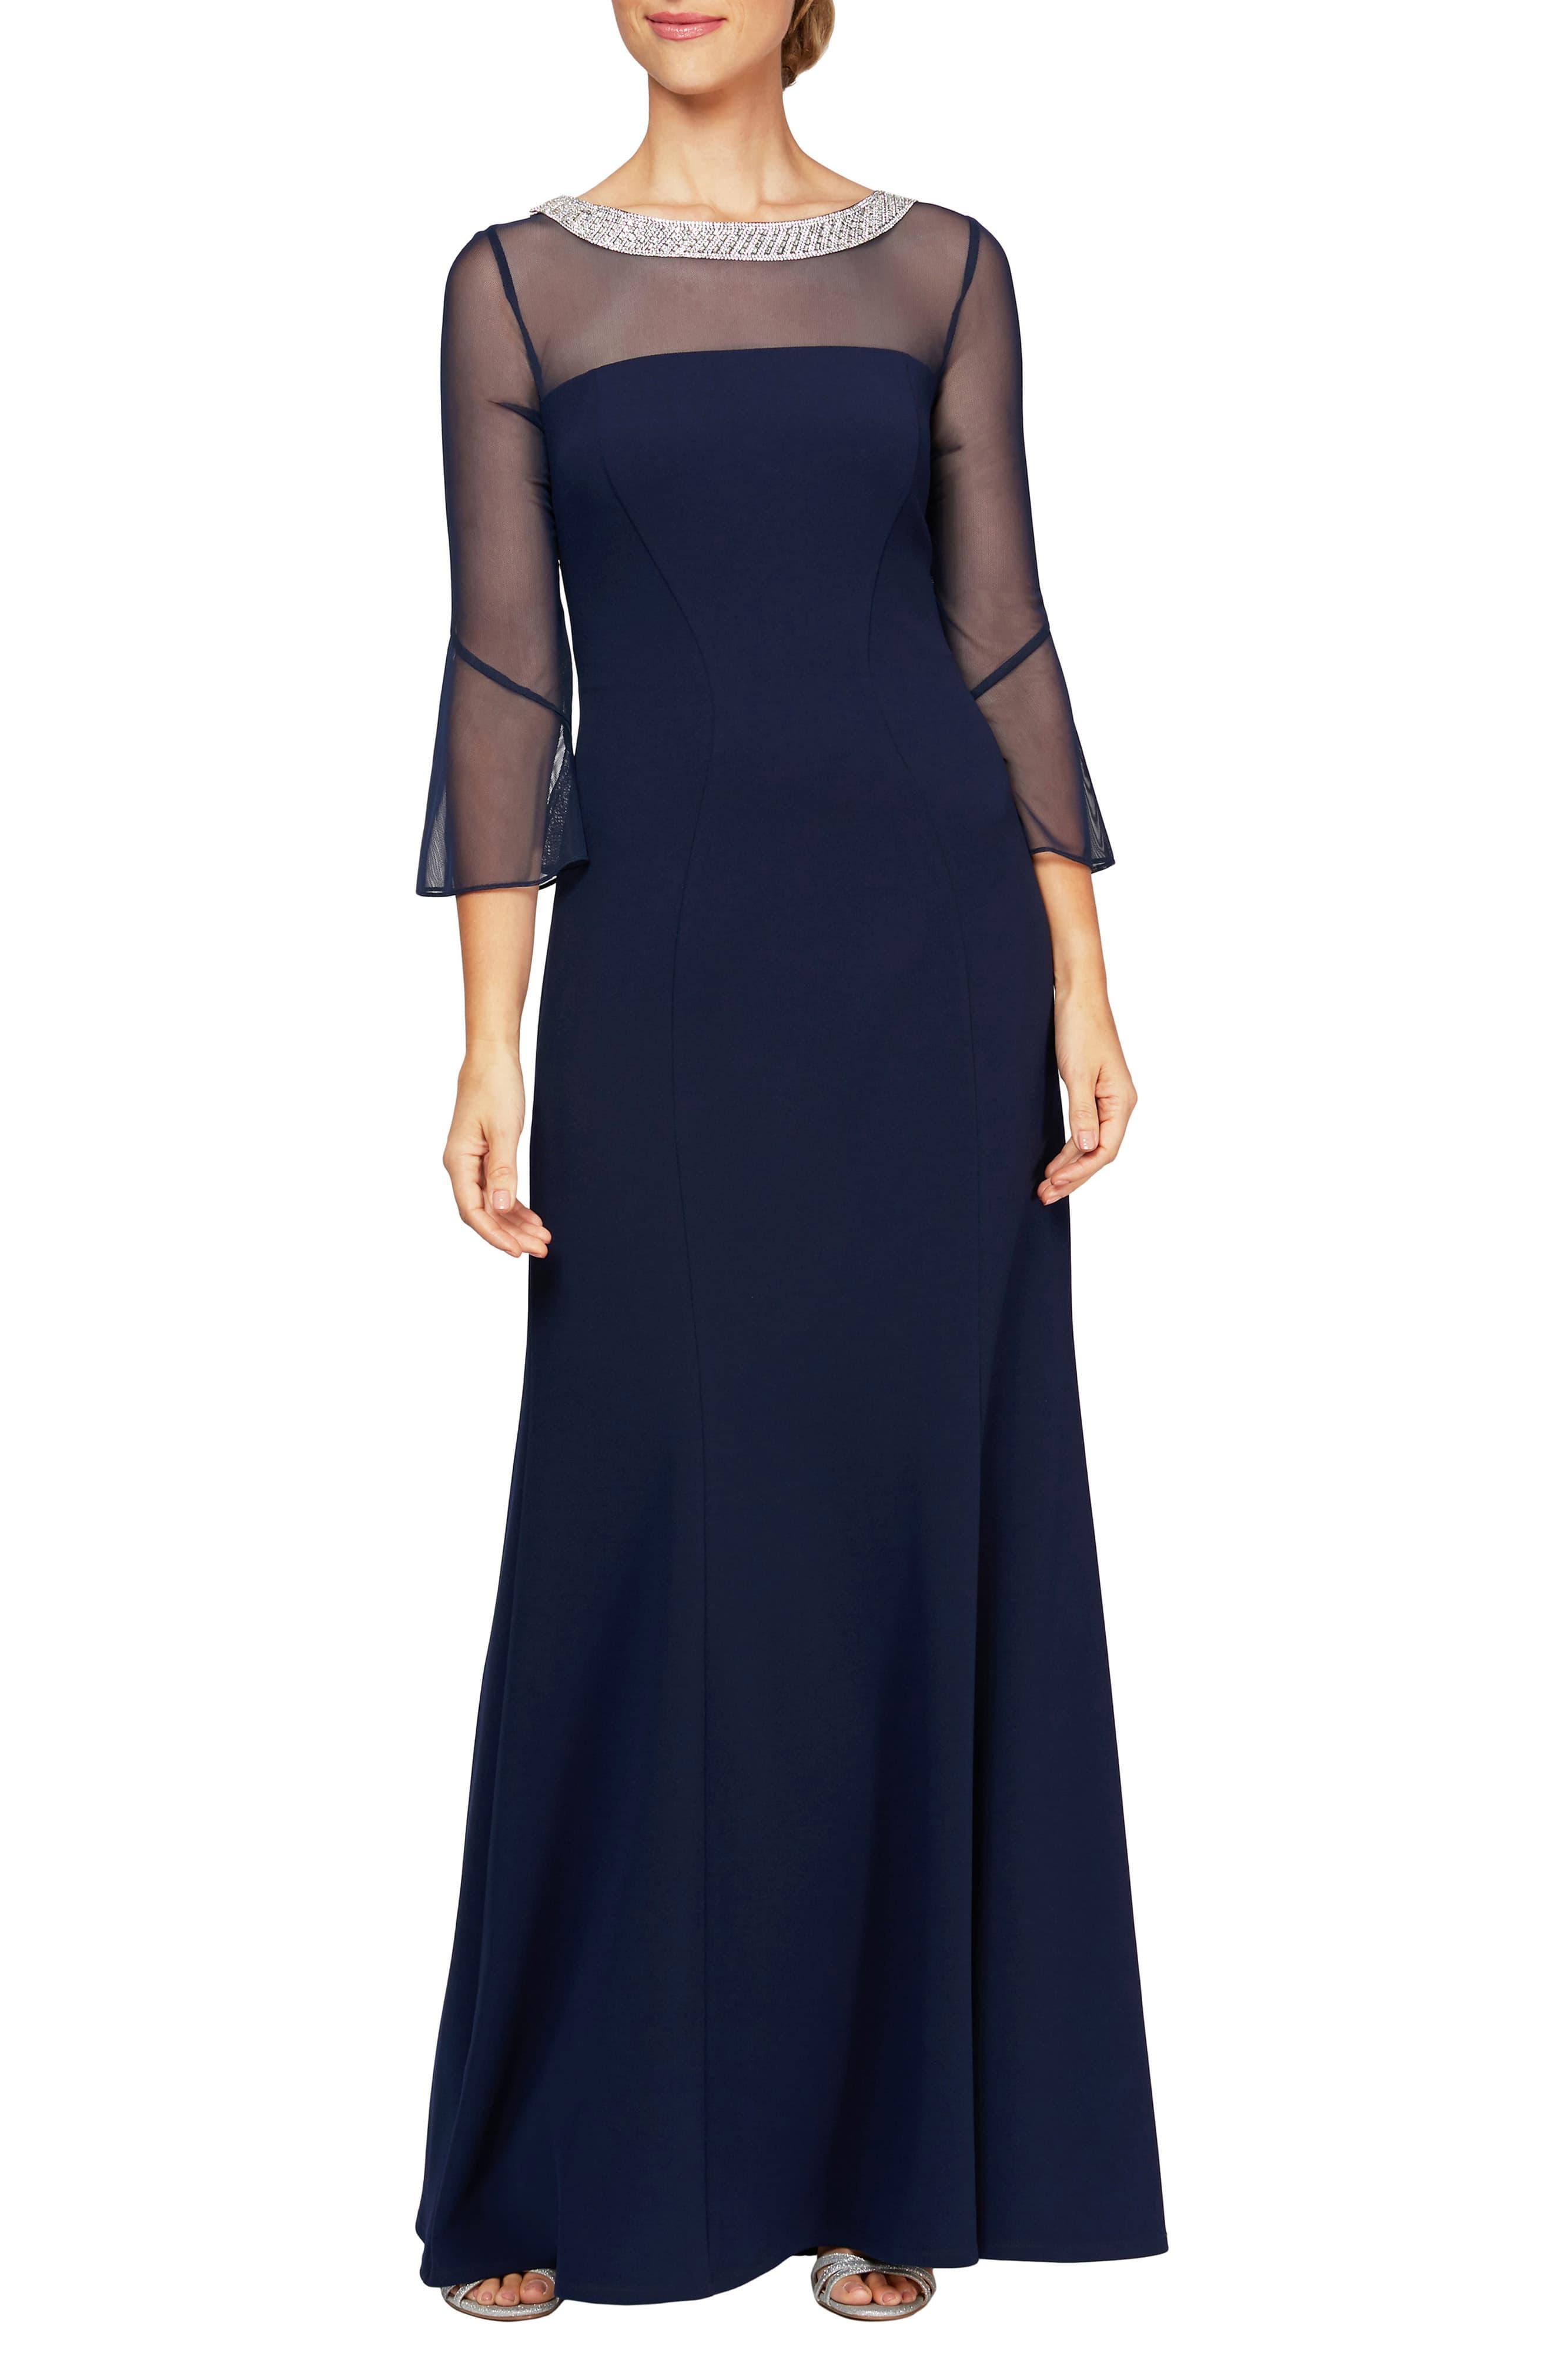 Alex Evenings Beaded Bateau Neck Evening Gown in Navy (Blue) - Lyst